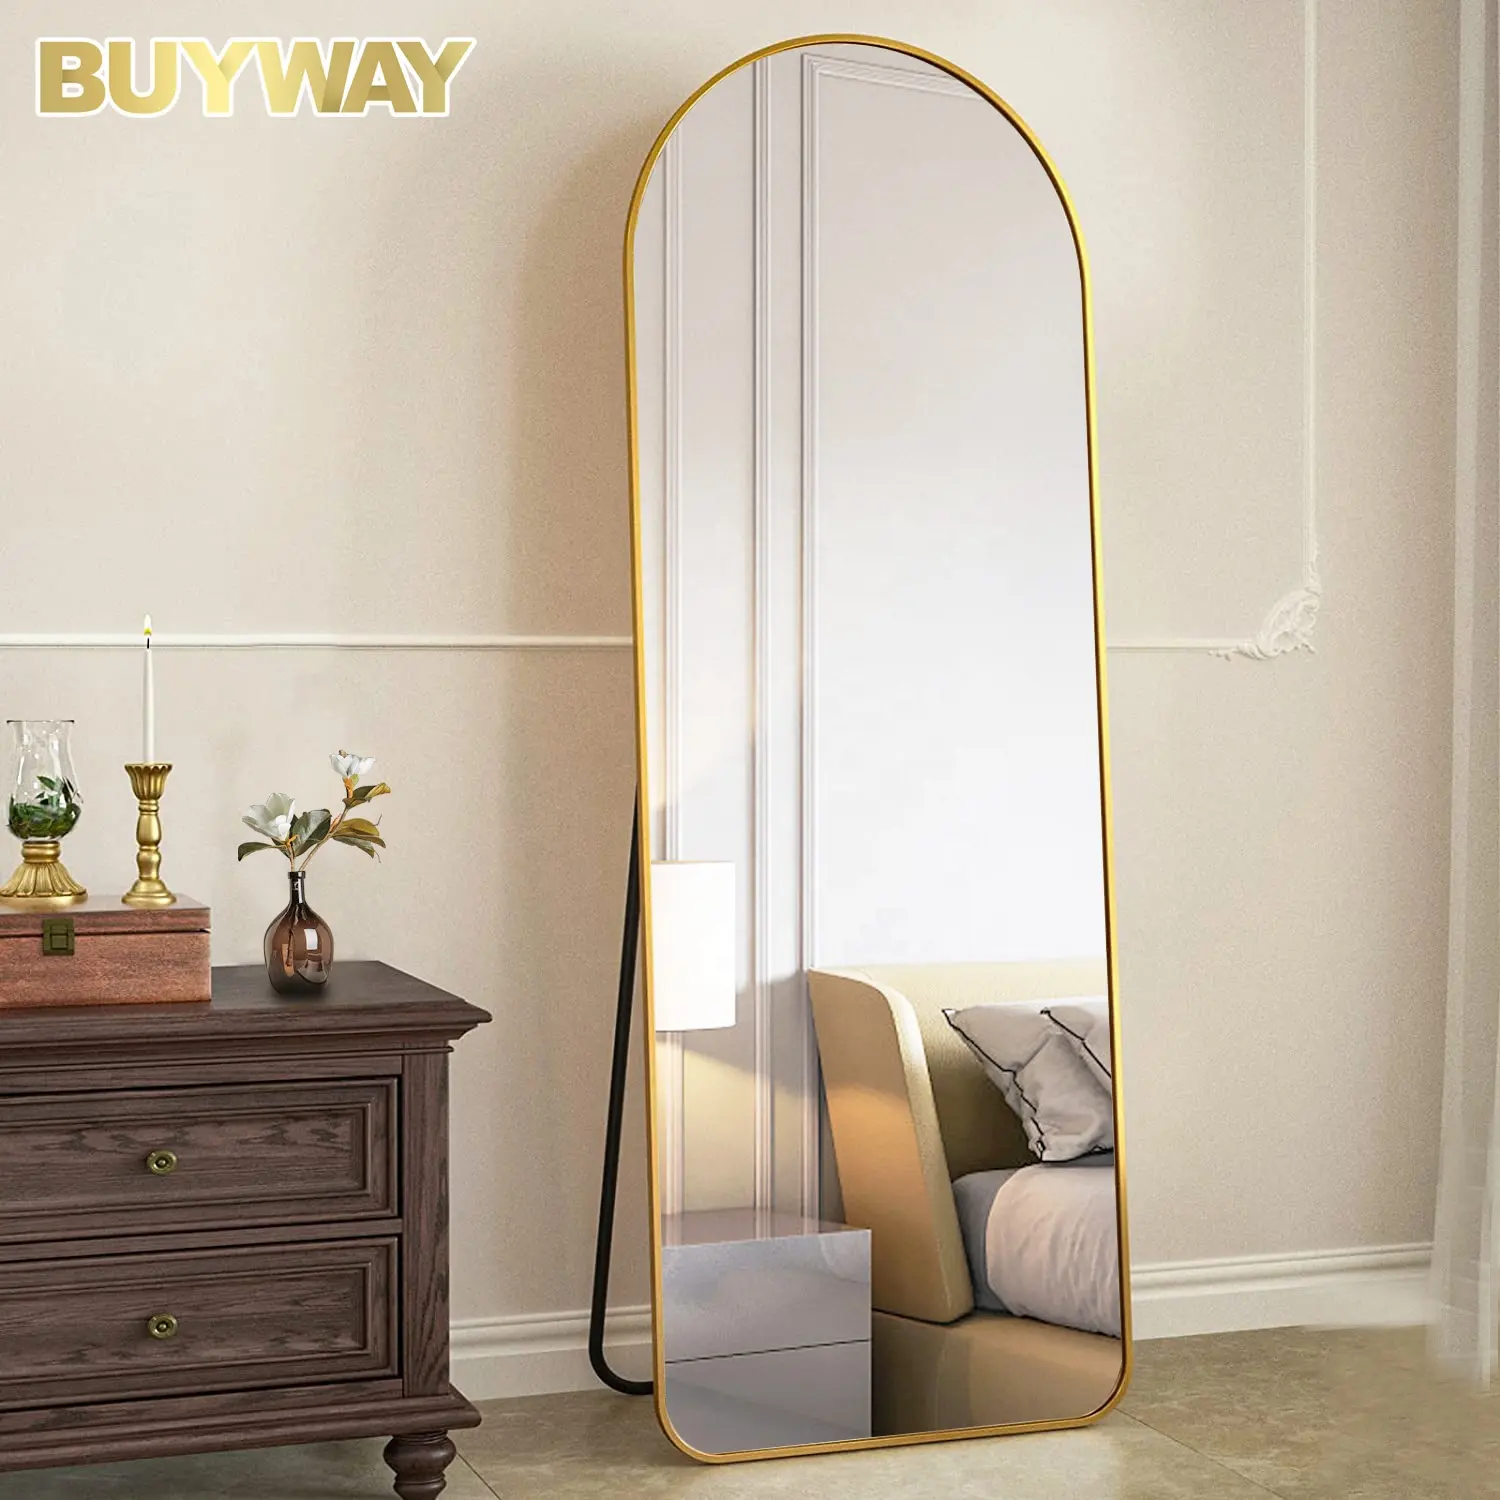 Bathroom Wall Mounted Hanging Mirrors, Arch Full Length Mirror with Stand, Tall Full Body Framed Espejo Miroir for Bedroom